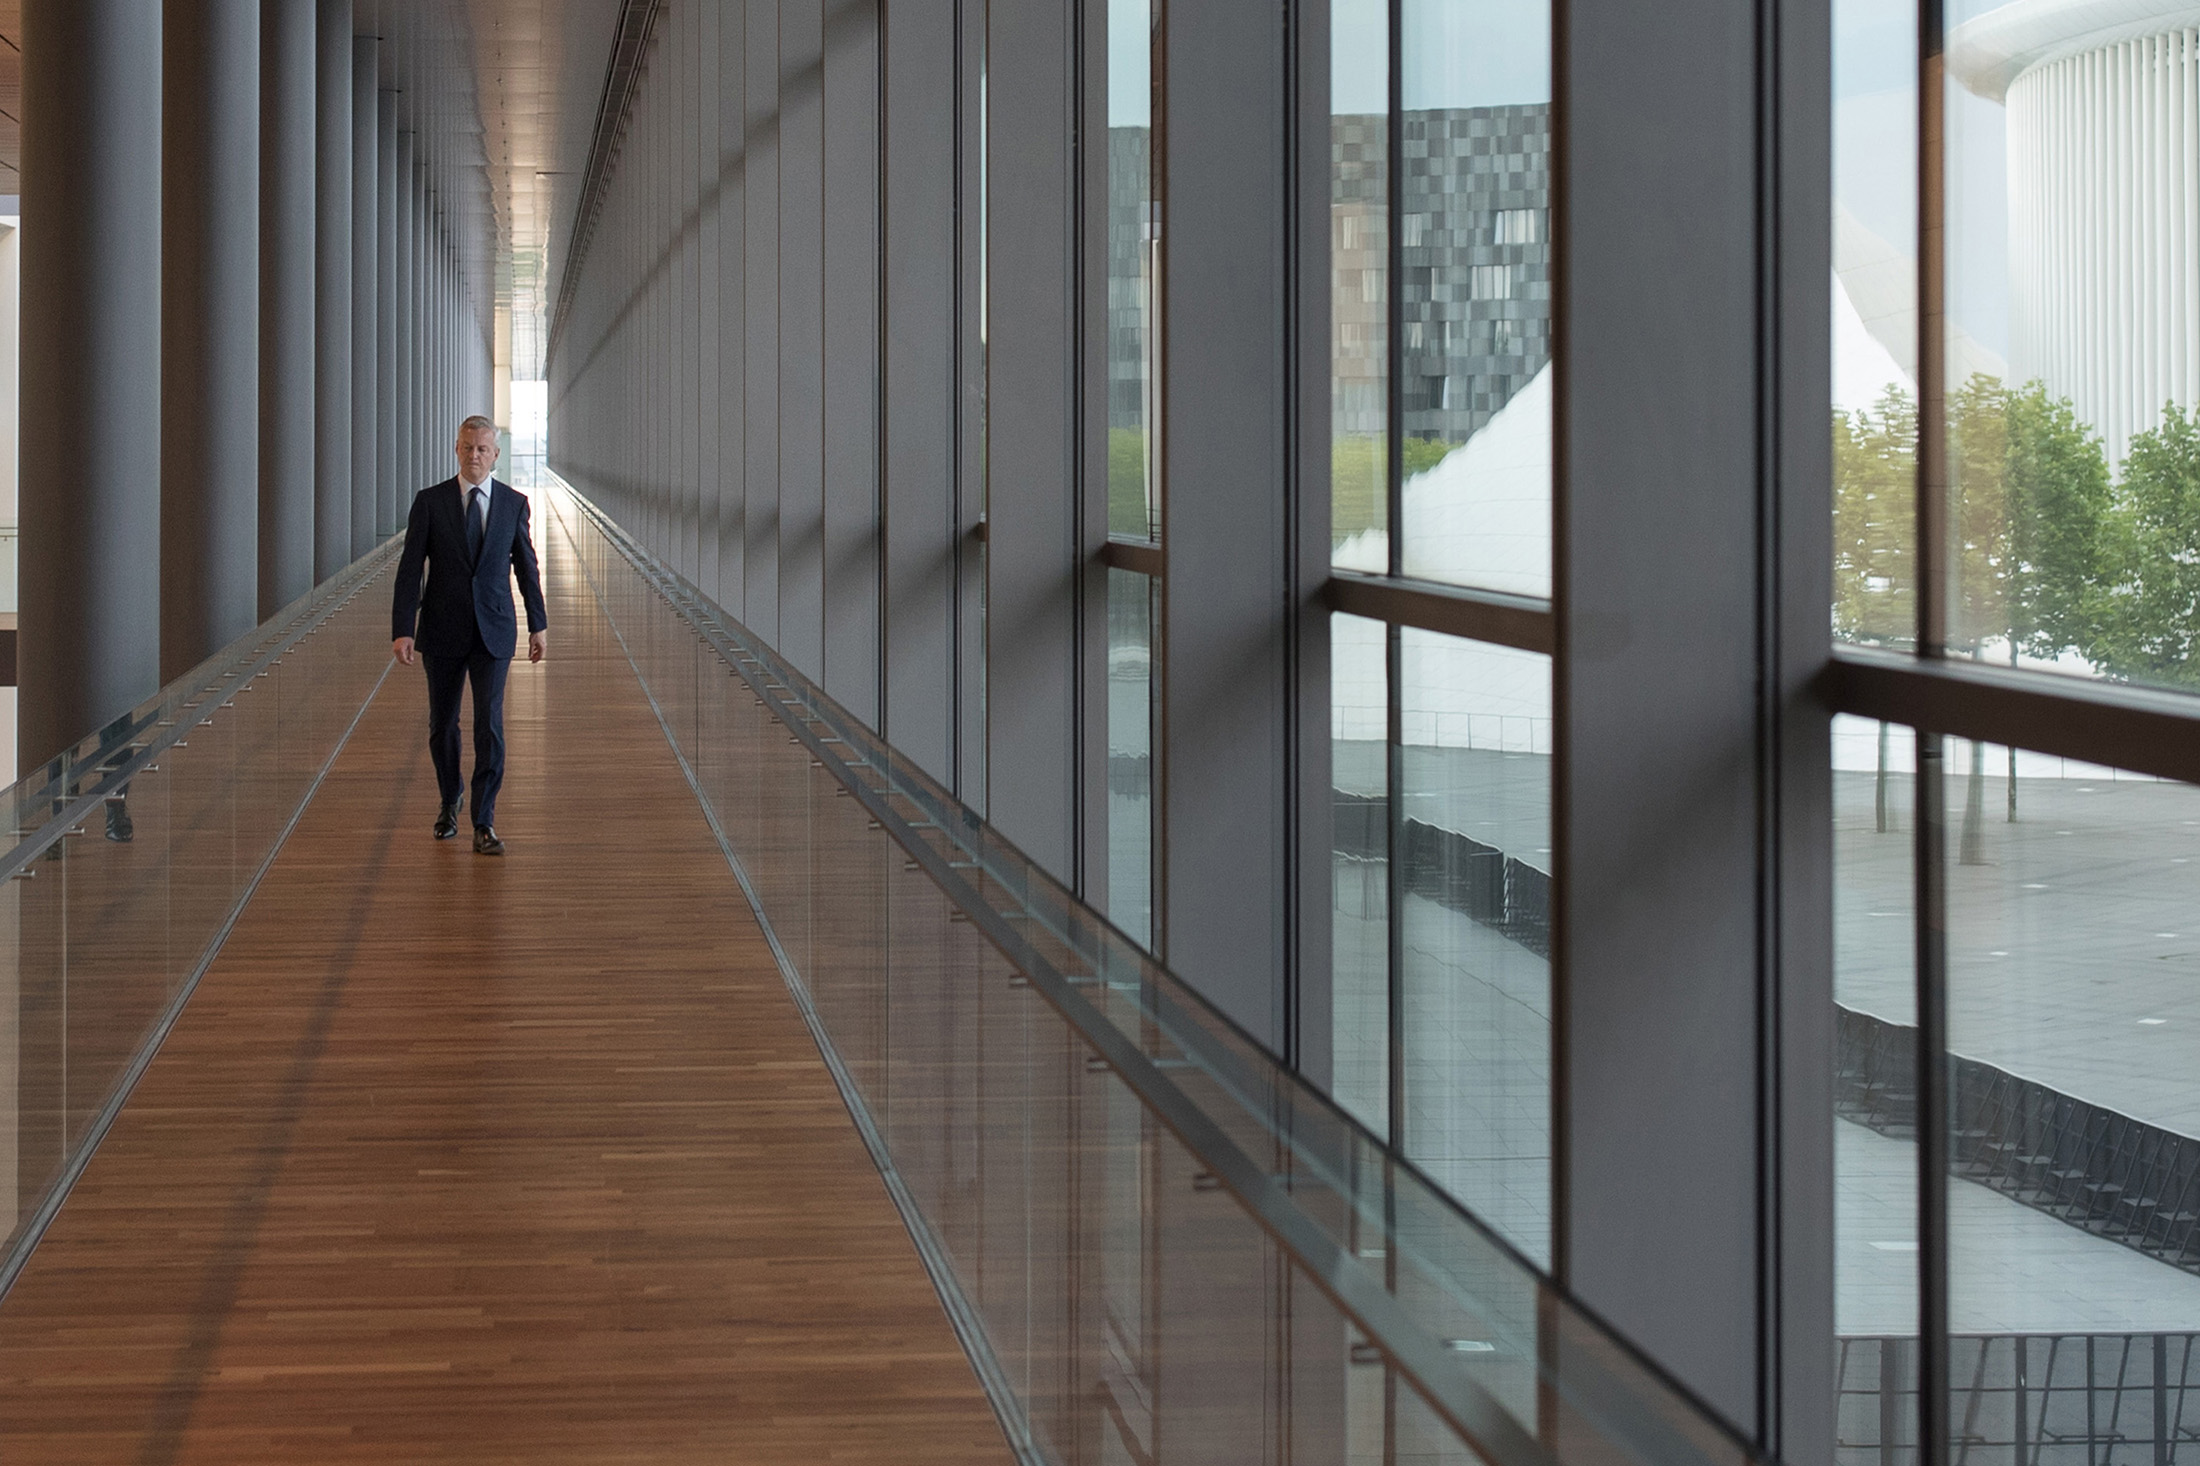 Bruno Le Maire, France's finance minister, walks along a corridor as he arrives for a Eurogroup meeting of European finance ministers in Luxembourg on Thursday, June 15, 2017. Euro area finance ministers plan to disburse EU8.5b bailout tranche for Greece, two officials familiar with the matter say, asking not to be named, pending final decision.
